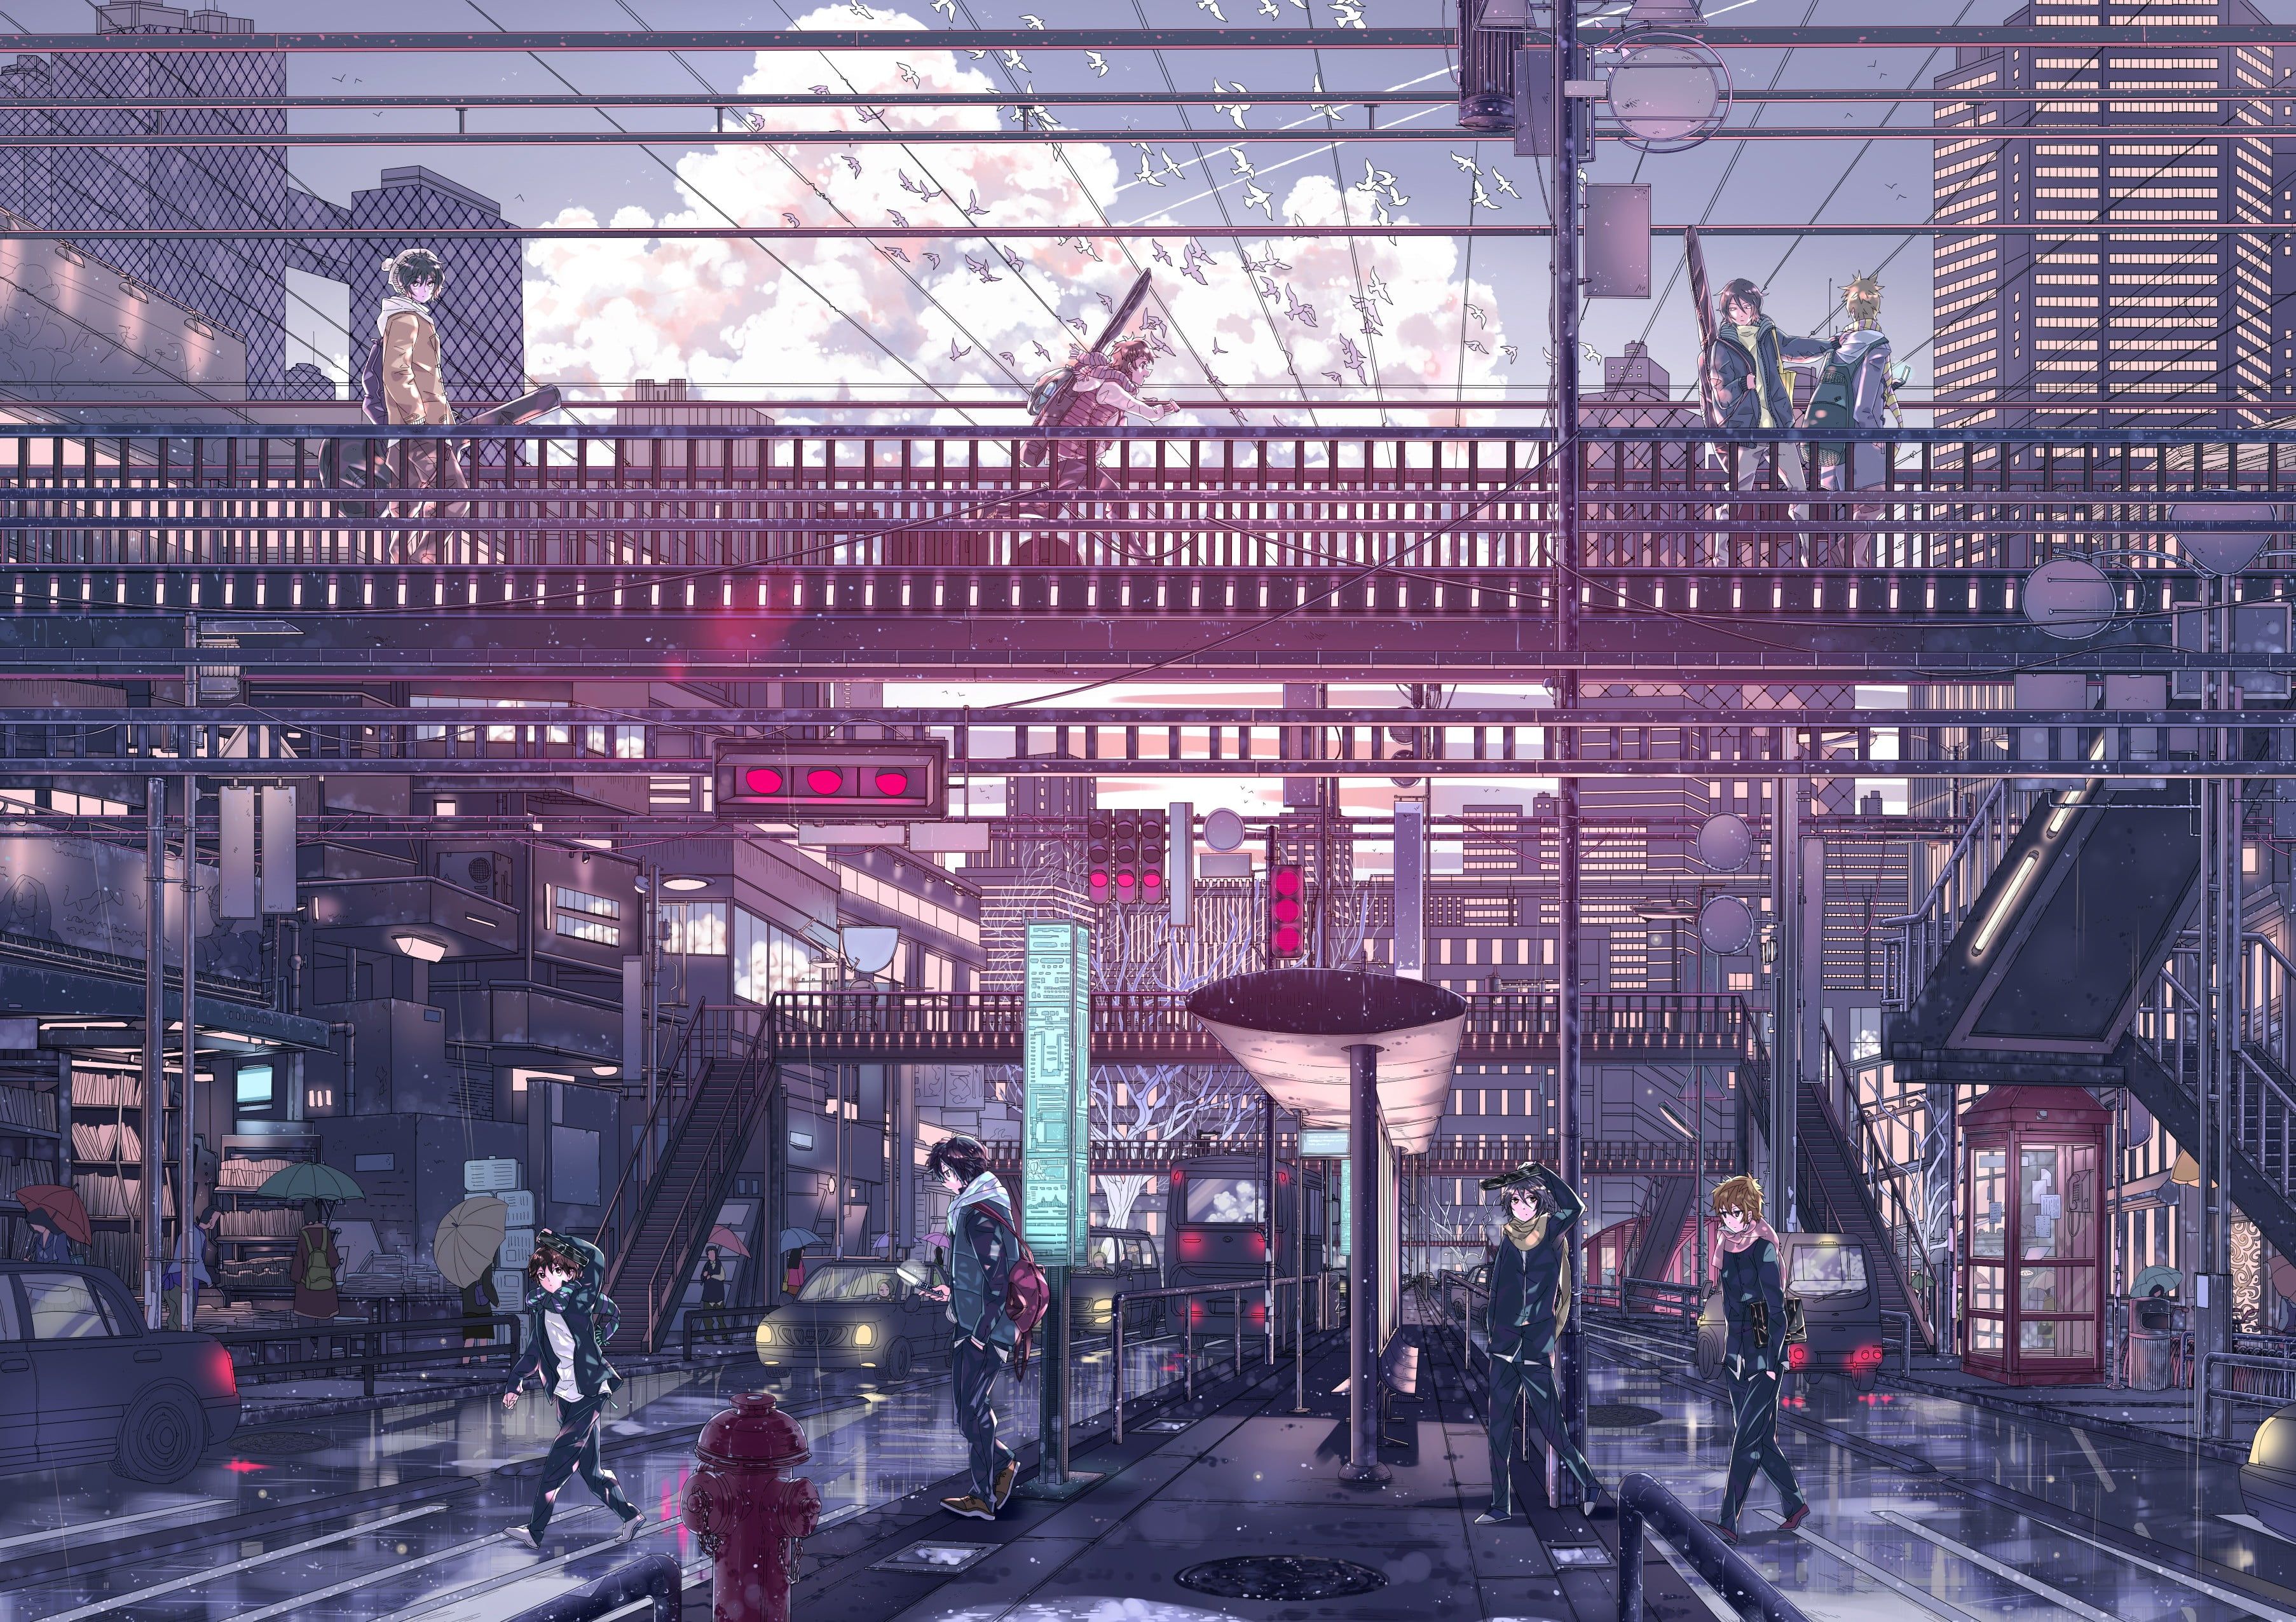 Train station with people anime digital .wallpaperflare.com